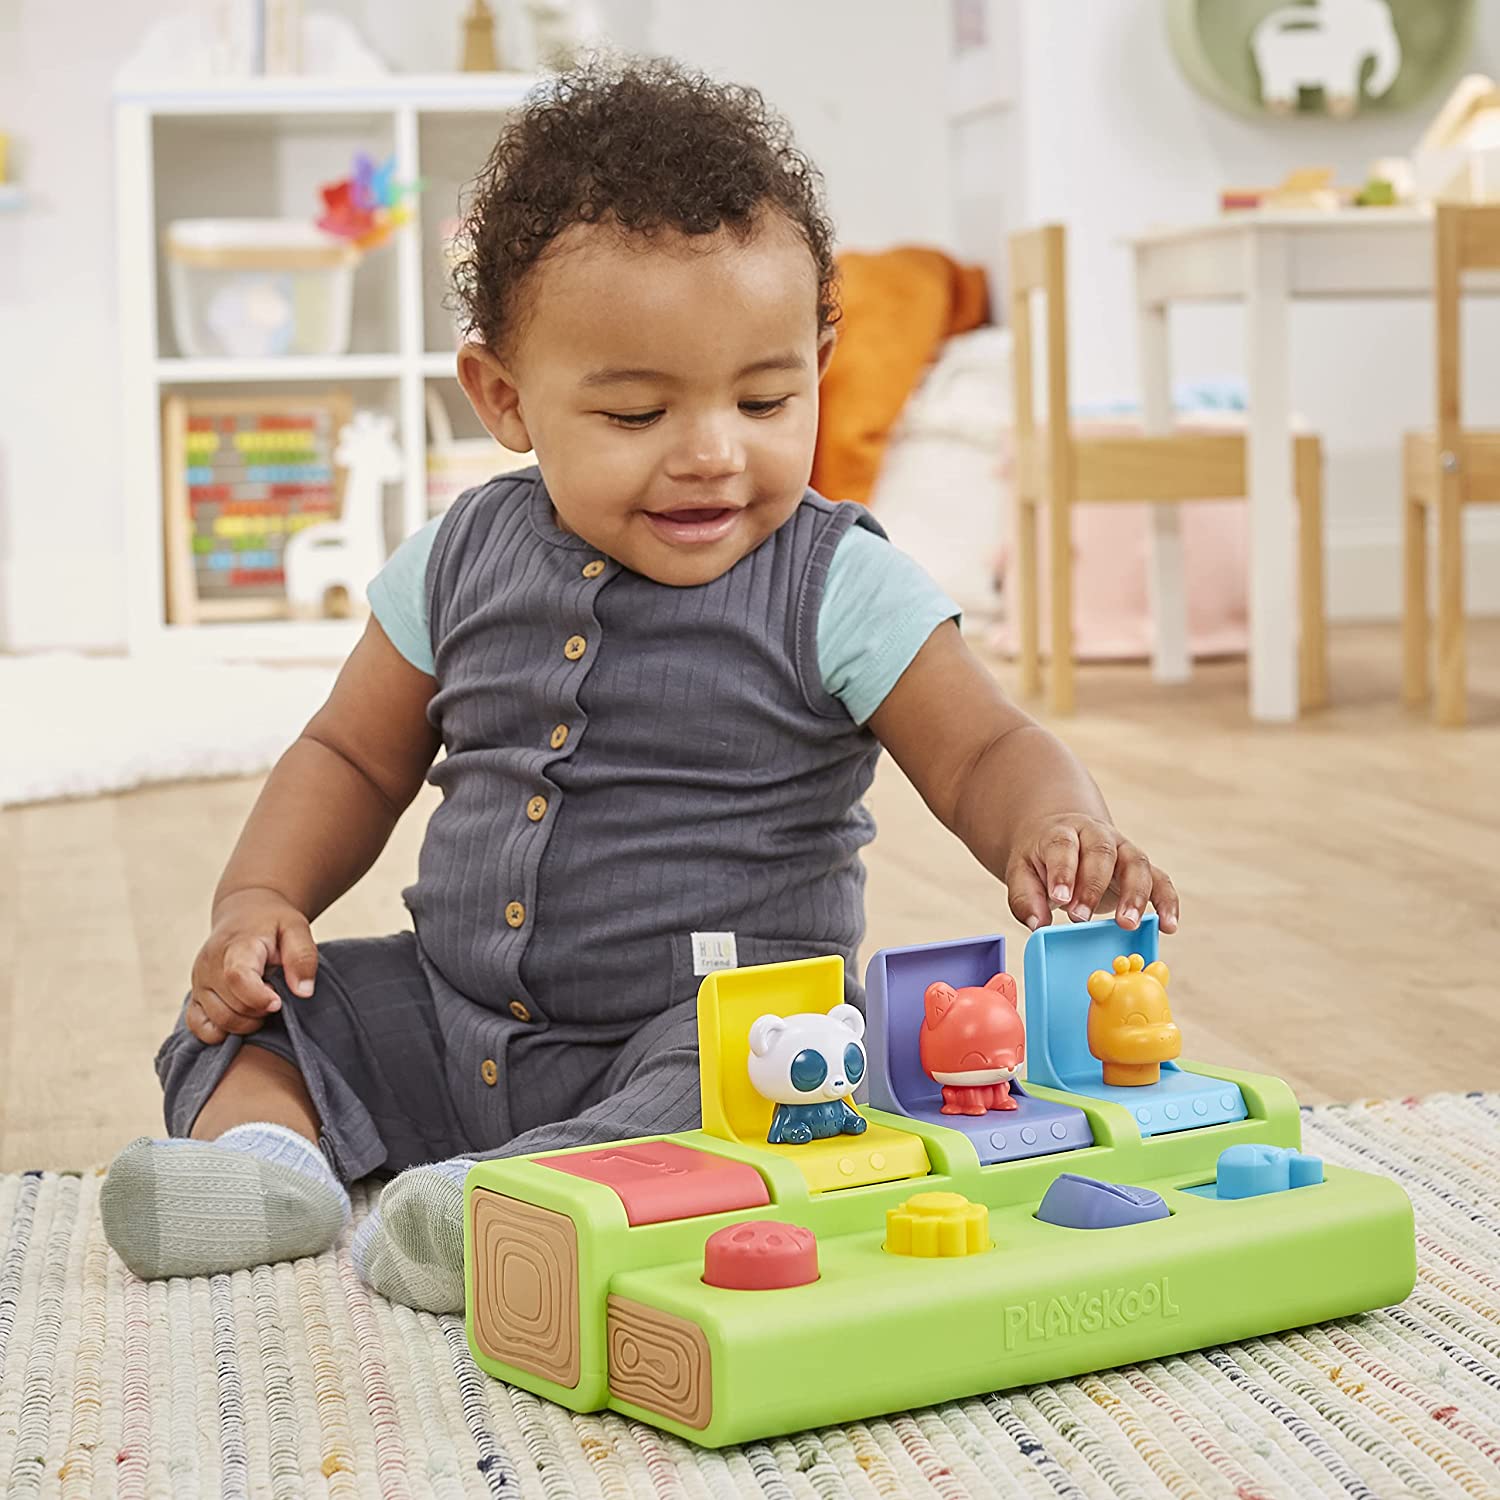 baby playing with poppin pals stem toy